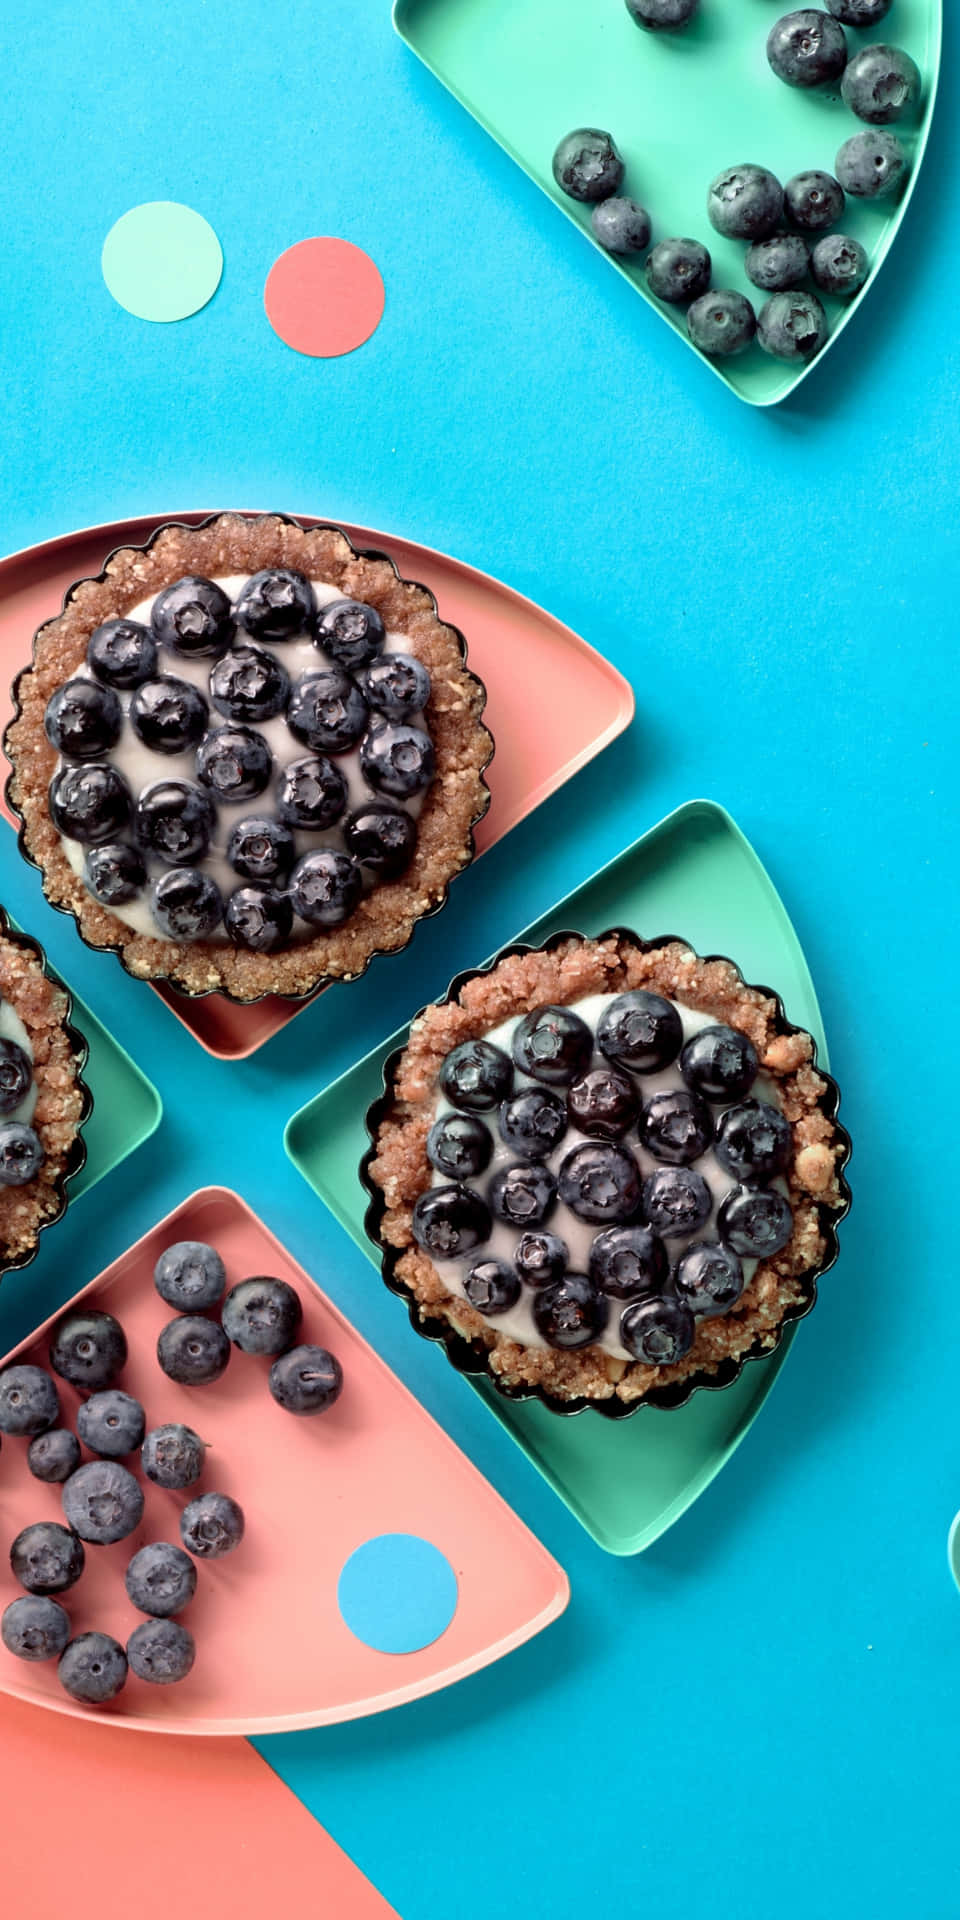 Blueberry Tarts On Colorful Plates